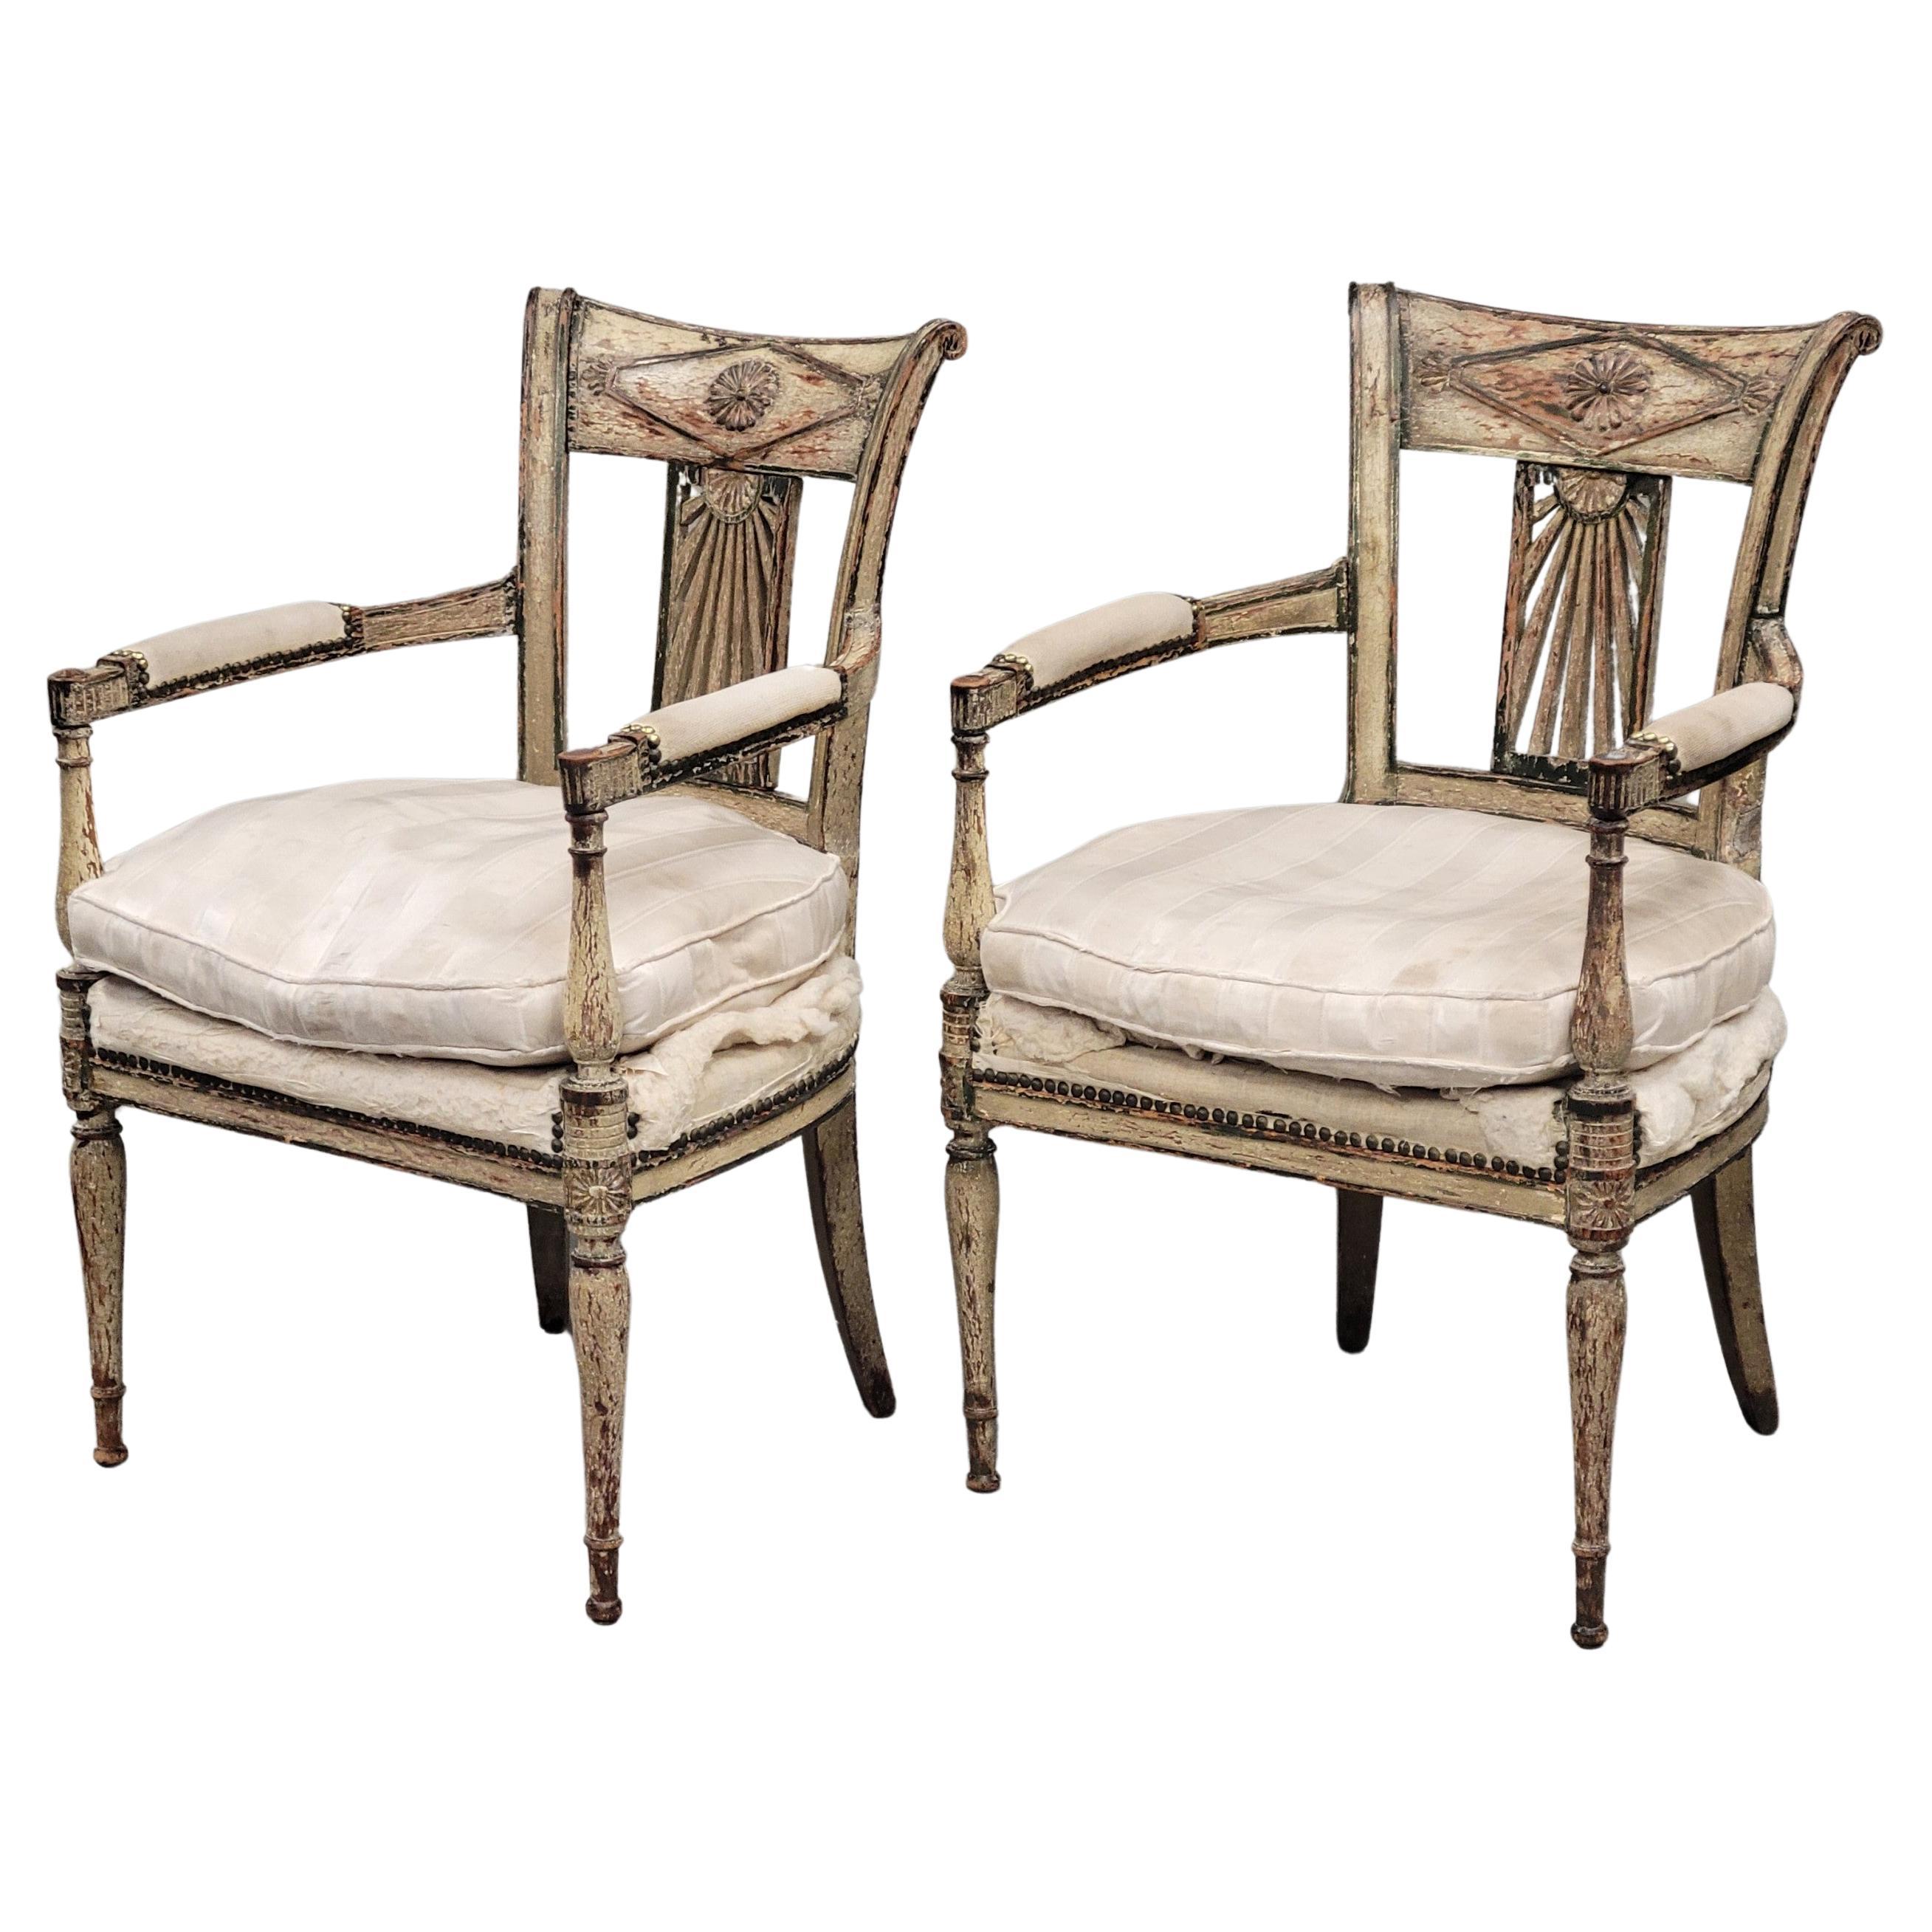 Antique Maison Jansen Style French Louis XVI Painted Fauteuil Chairs - a Pair For Sale